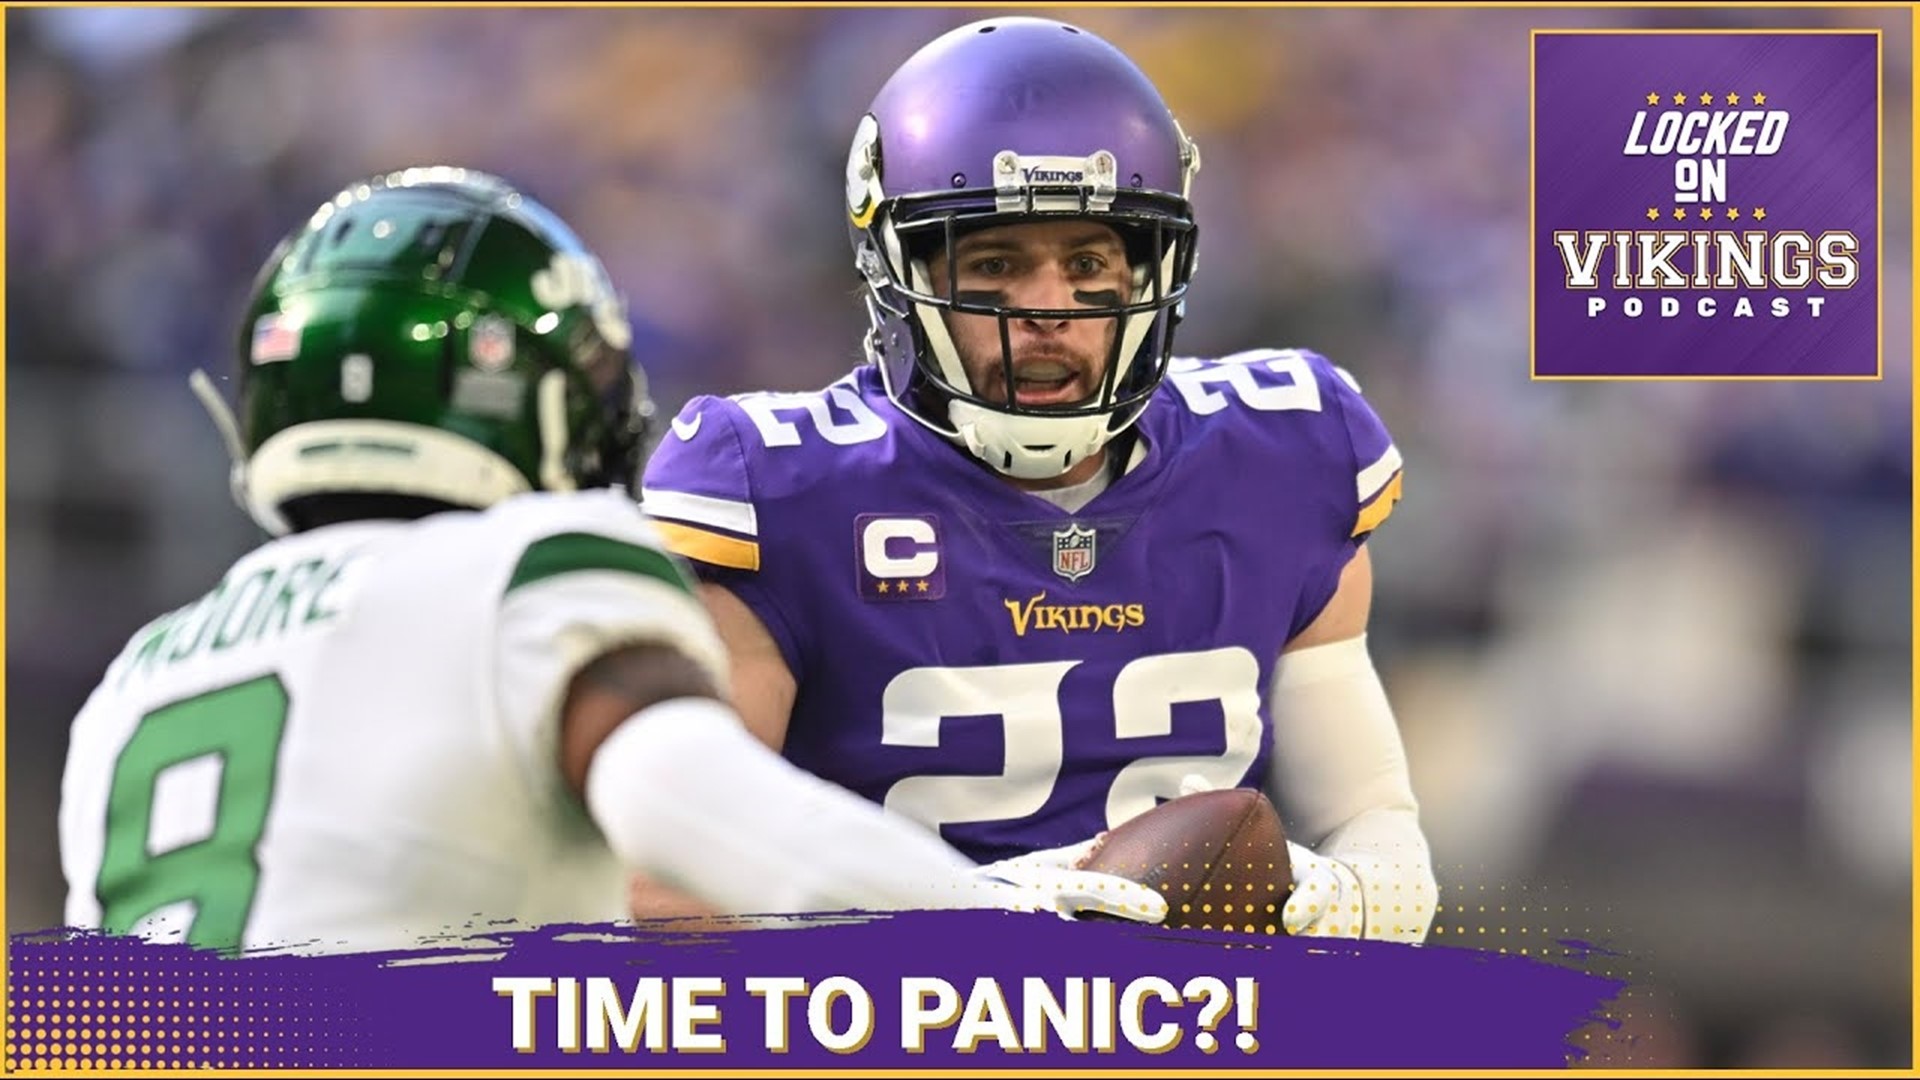 After trading Za'Darius Smith away, is it time to panic about the Vikings defense? Probably not, and there's a few reasons why.